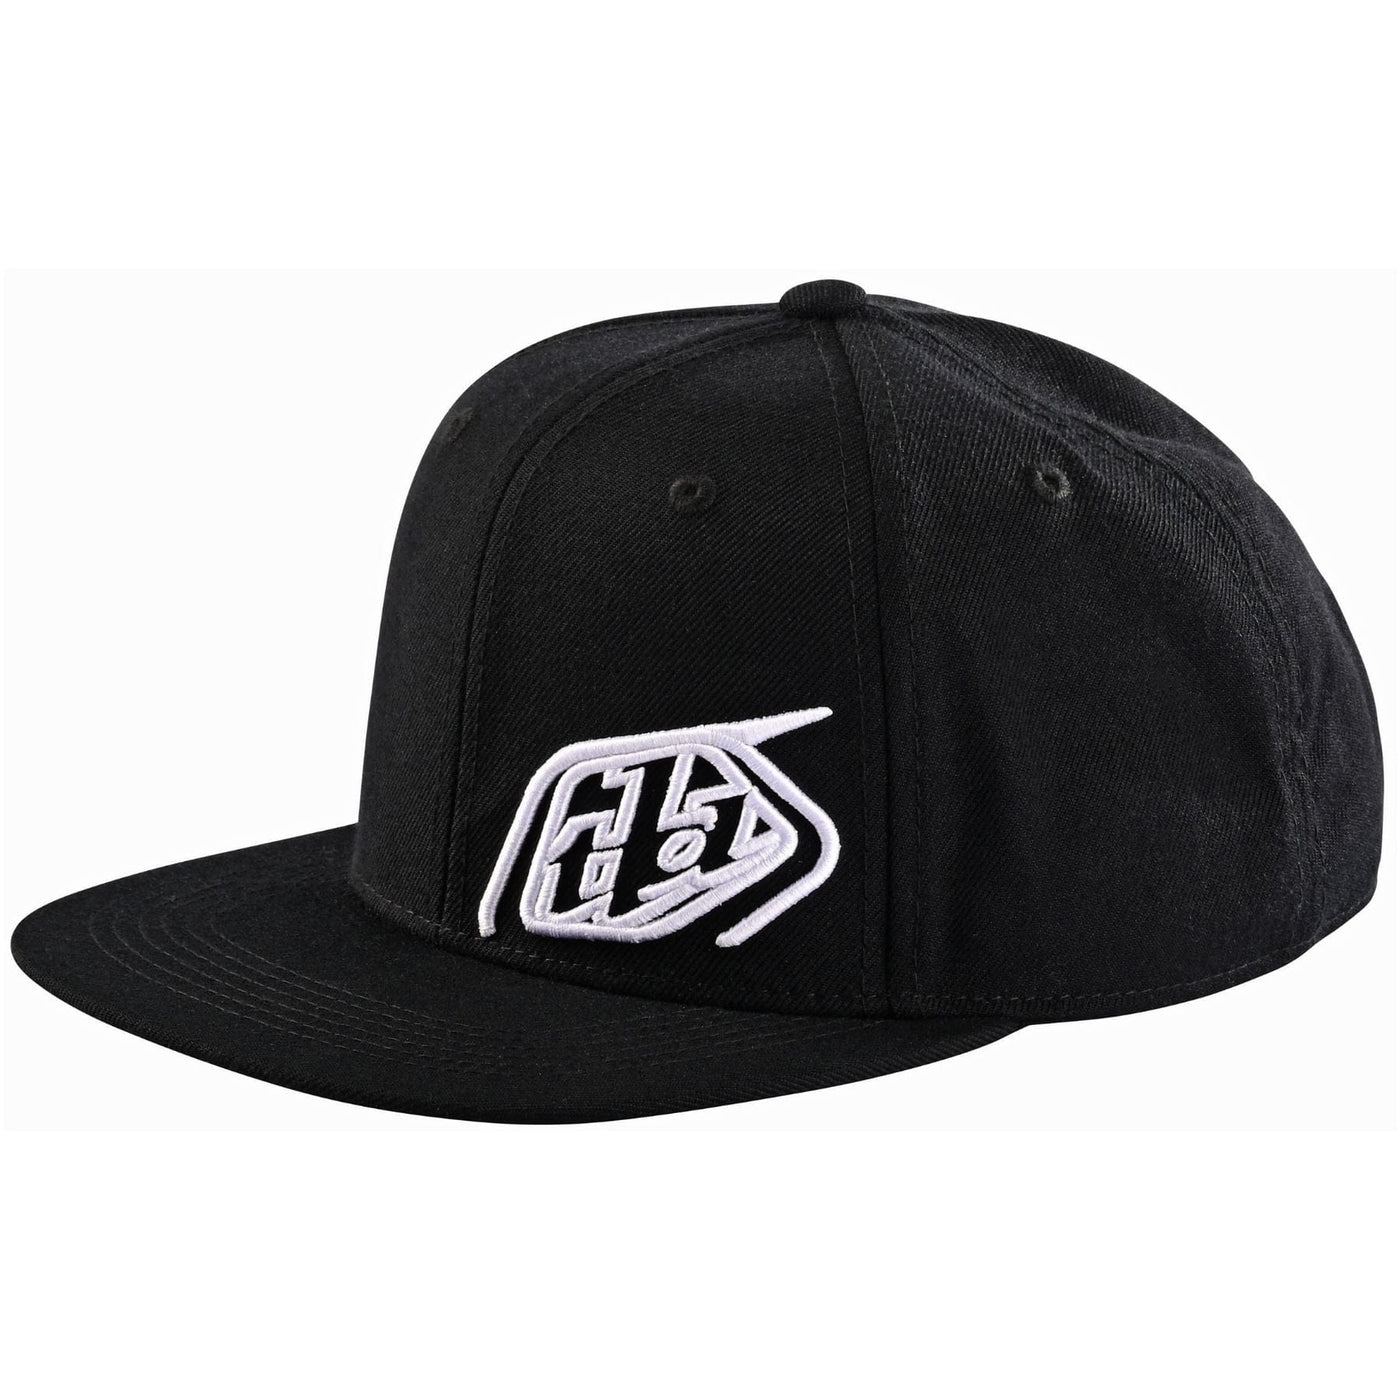 Troy Lee Designs 9FIFTY Slice Snapback Hat - Black/White 8Lines Shop - Fast Shipping